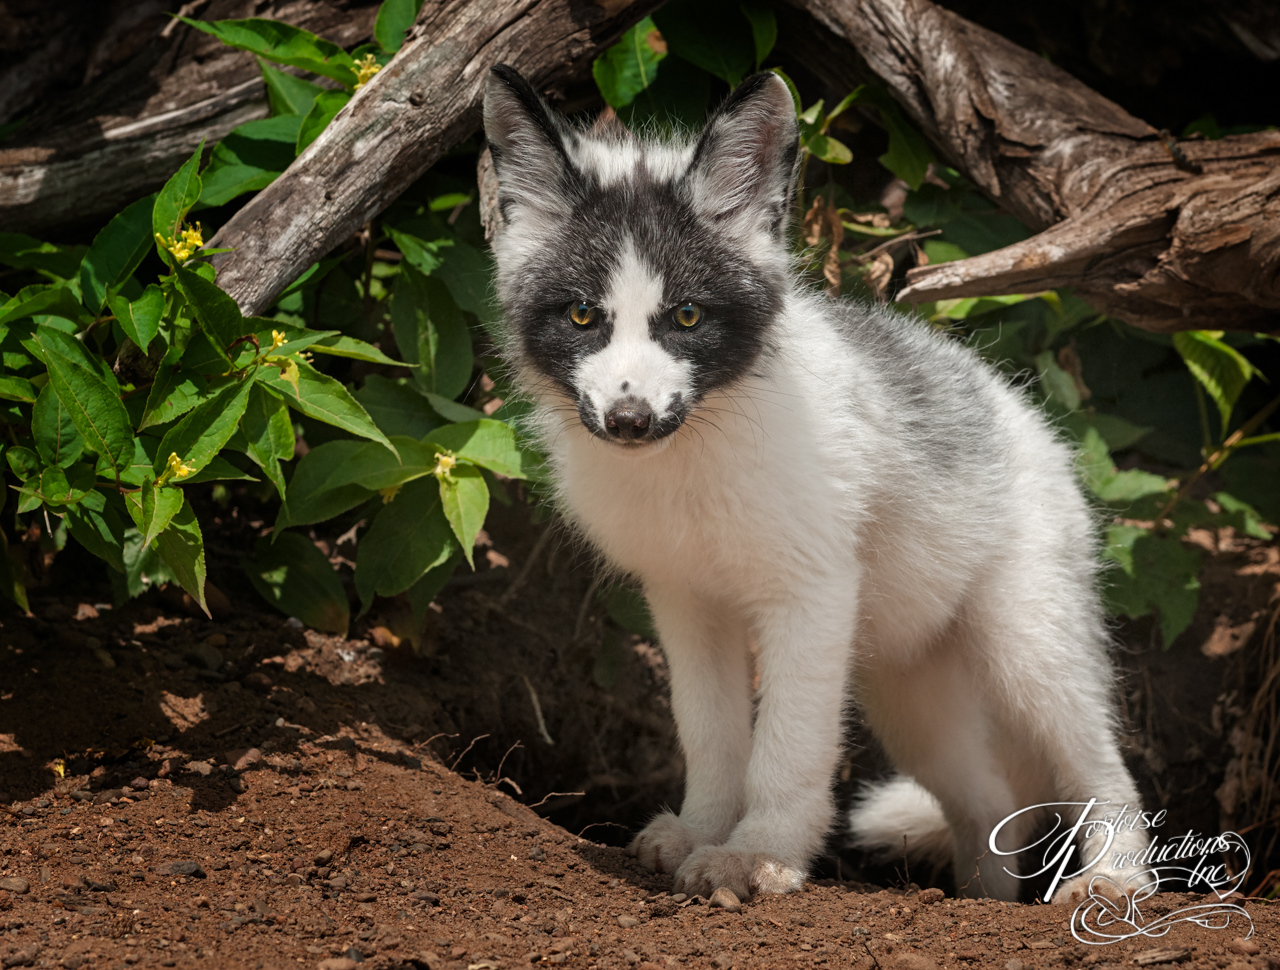 Young Marble Fox (Vulpes vulpes) Looks Out